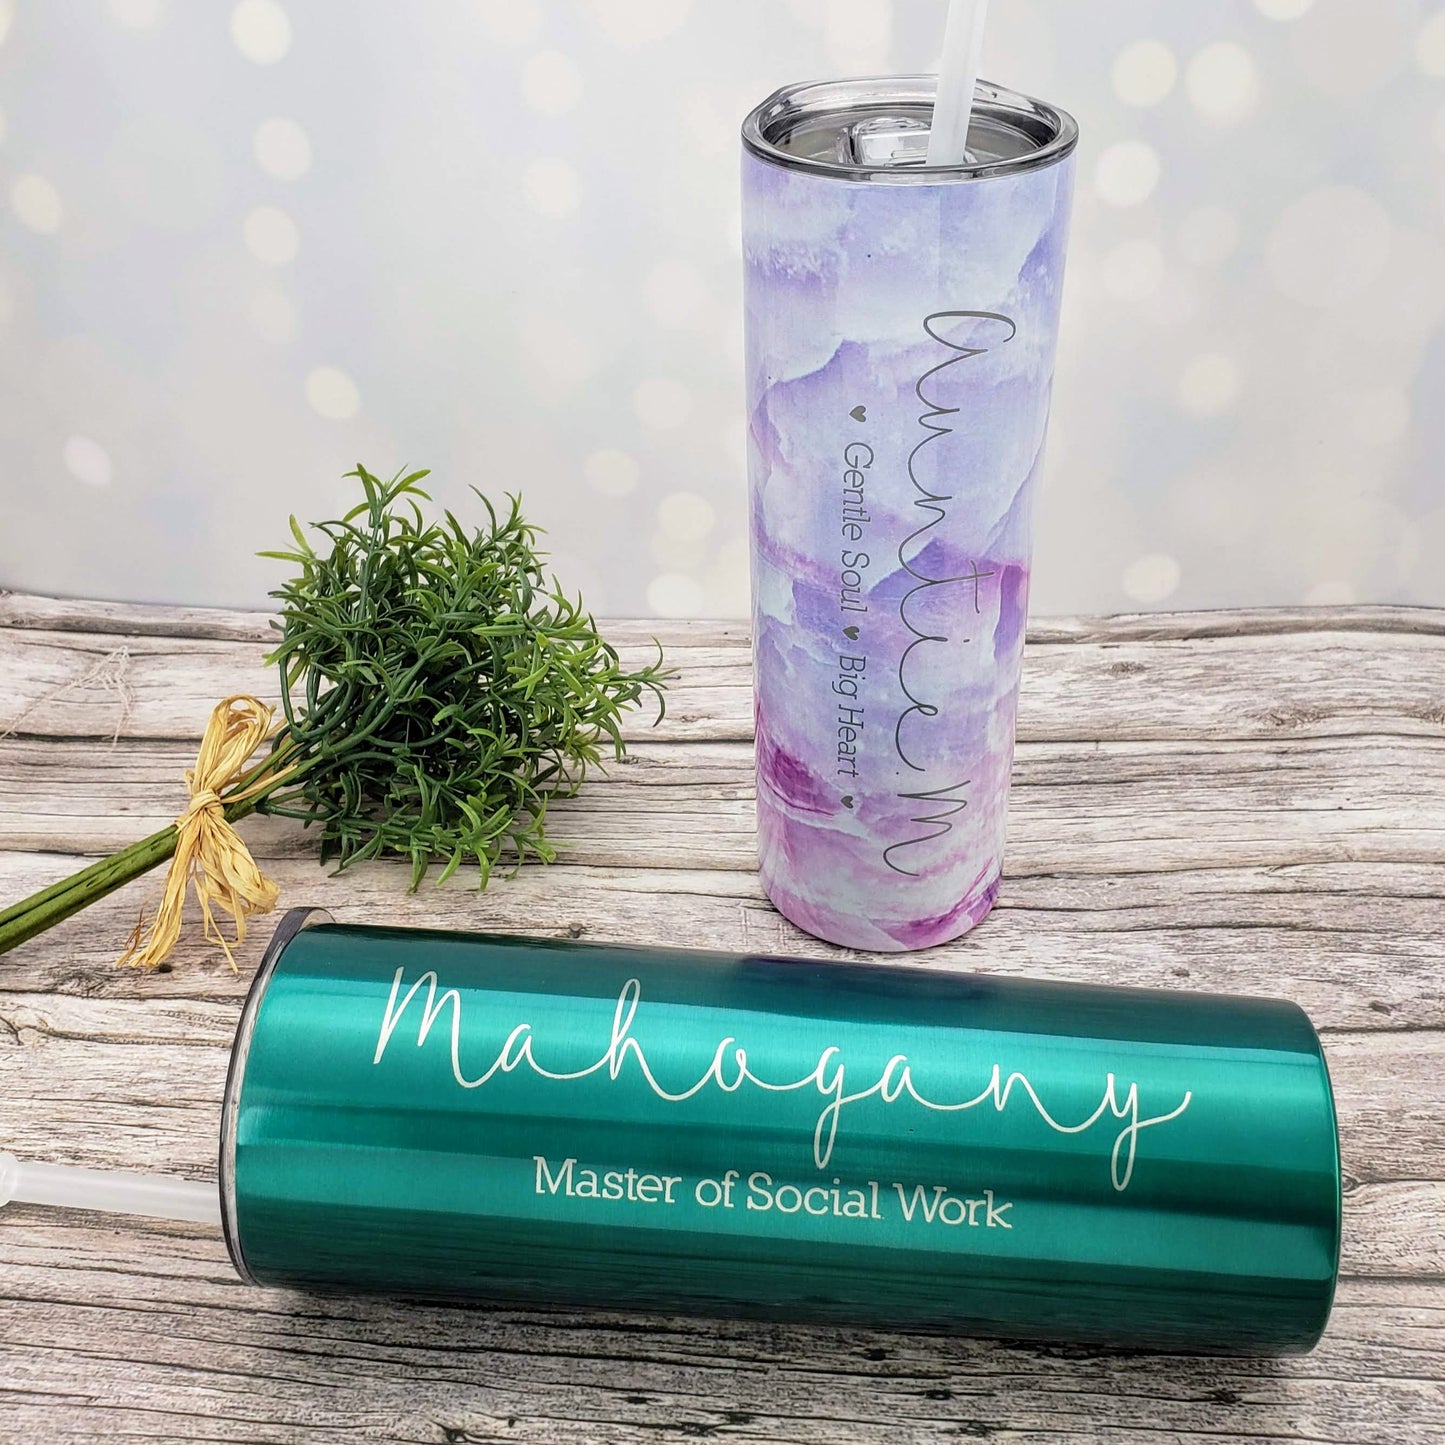 AVITO 20 oz Personalized Mom Tumbler with Kids' Names - Gift for Mom -  Mother's Day Gift - Stainless…See more AVITO 20 oz Personalized Mom Tumbler